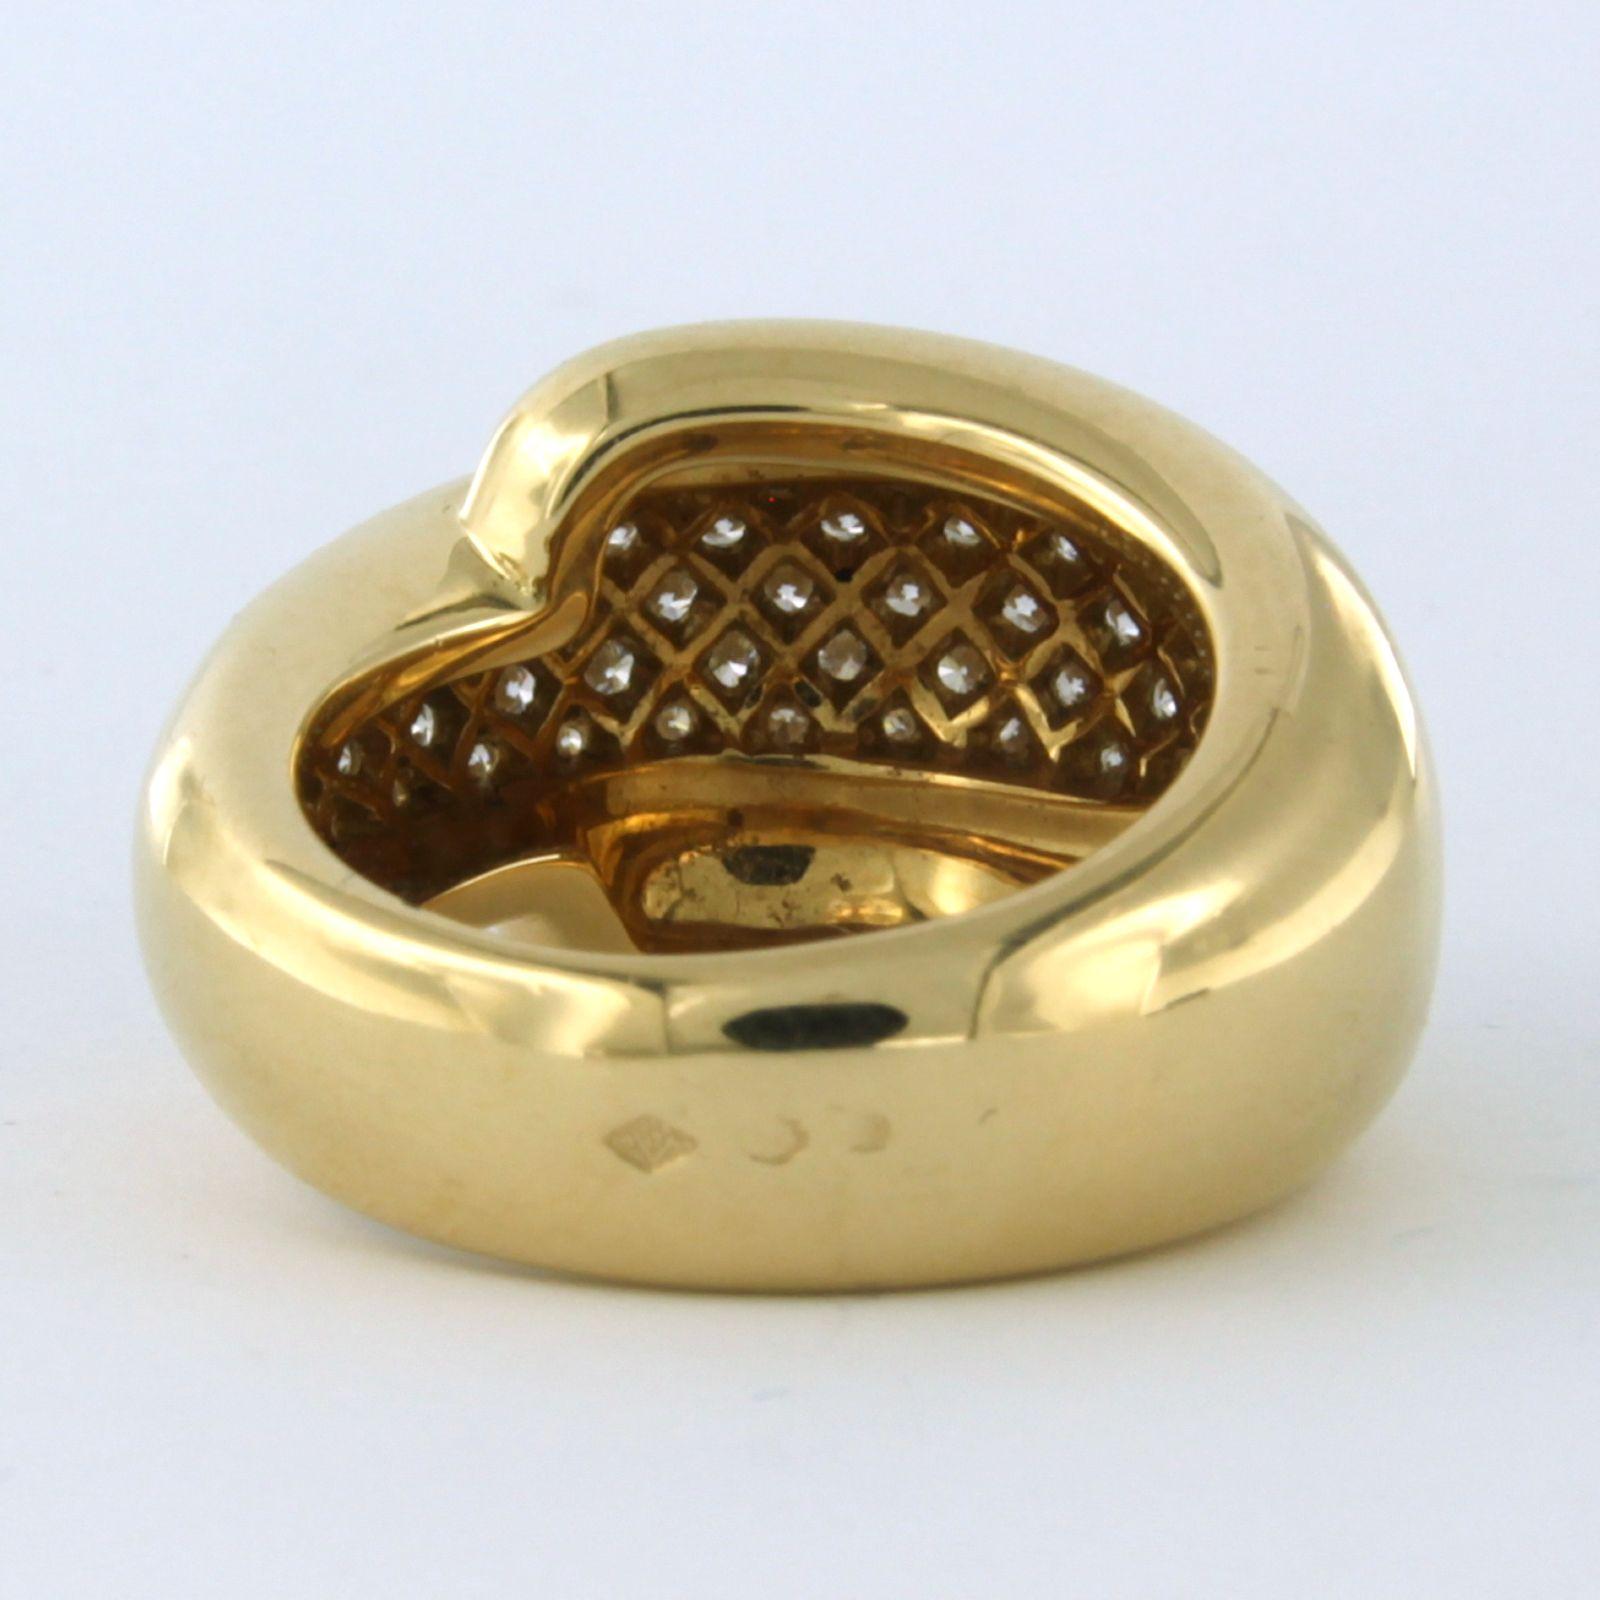 CHAUMET PARIS ring with diamonds 18k yellow gold In Good Condition For Sale In The Hague, ZH